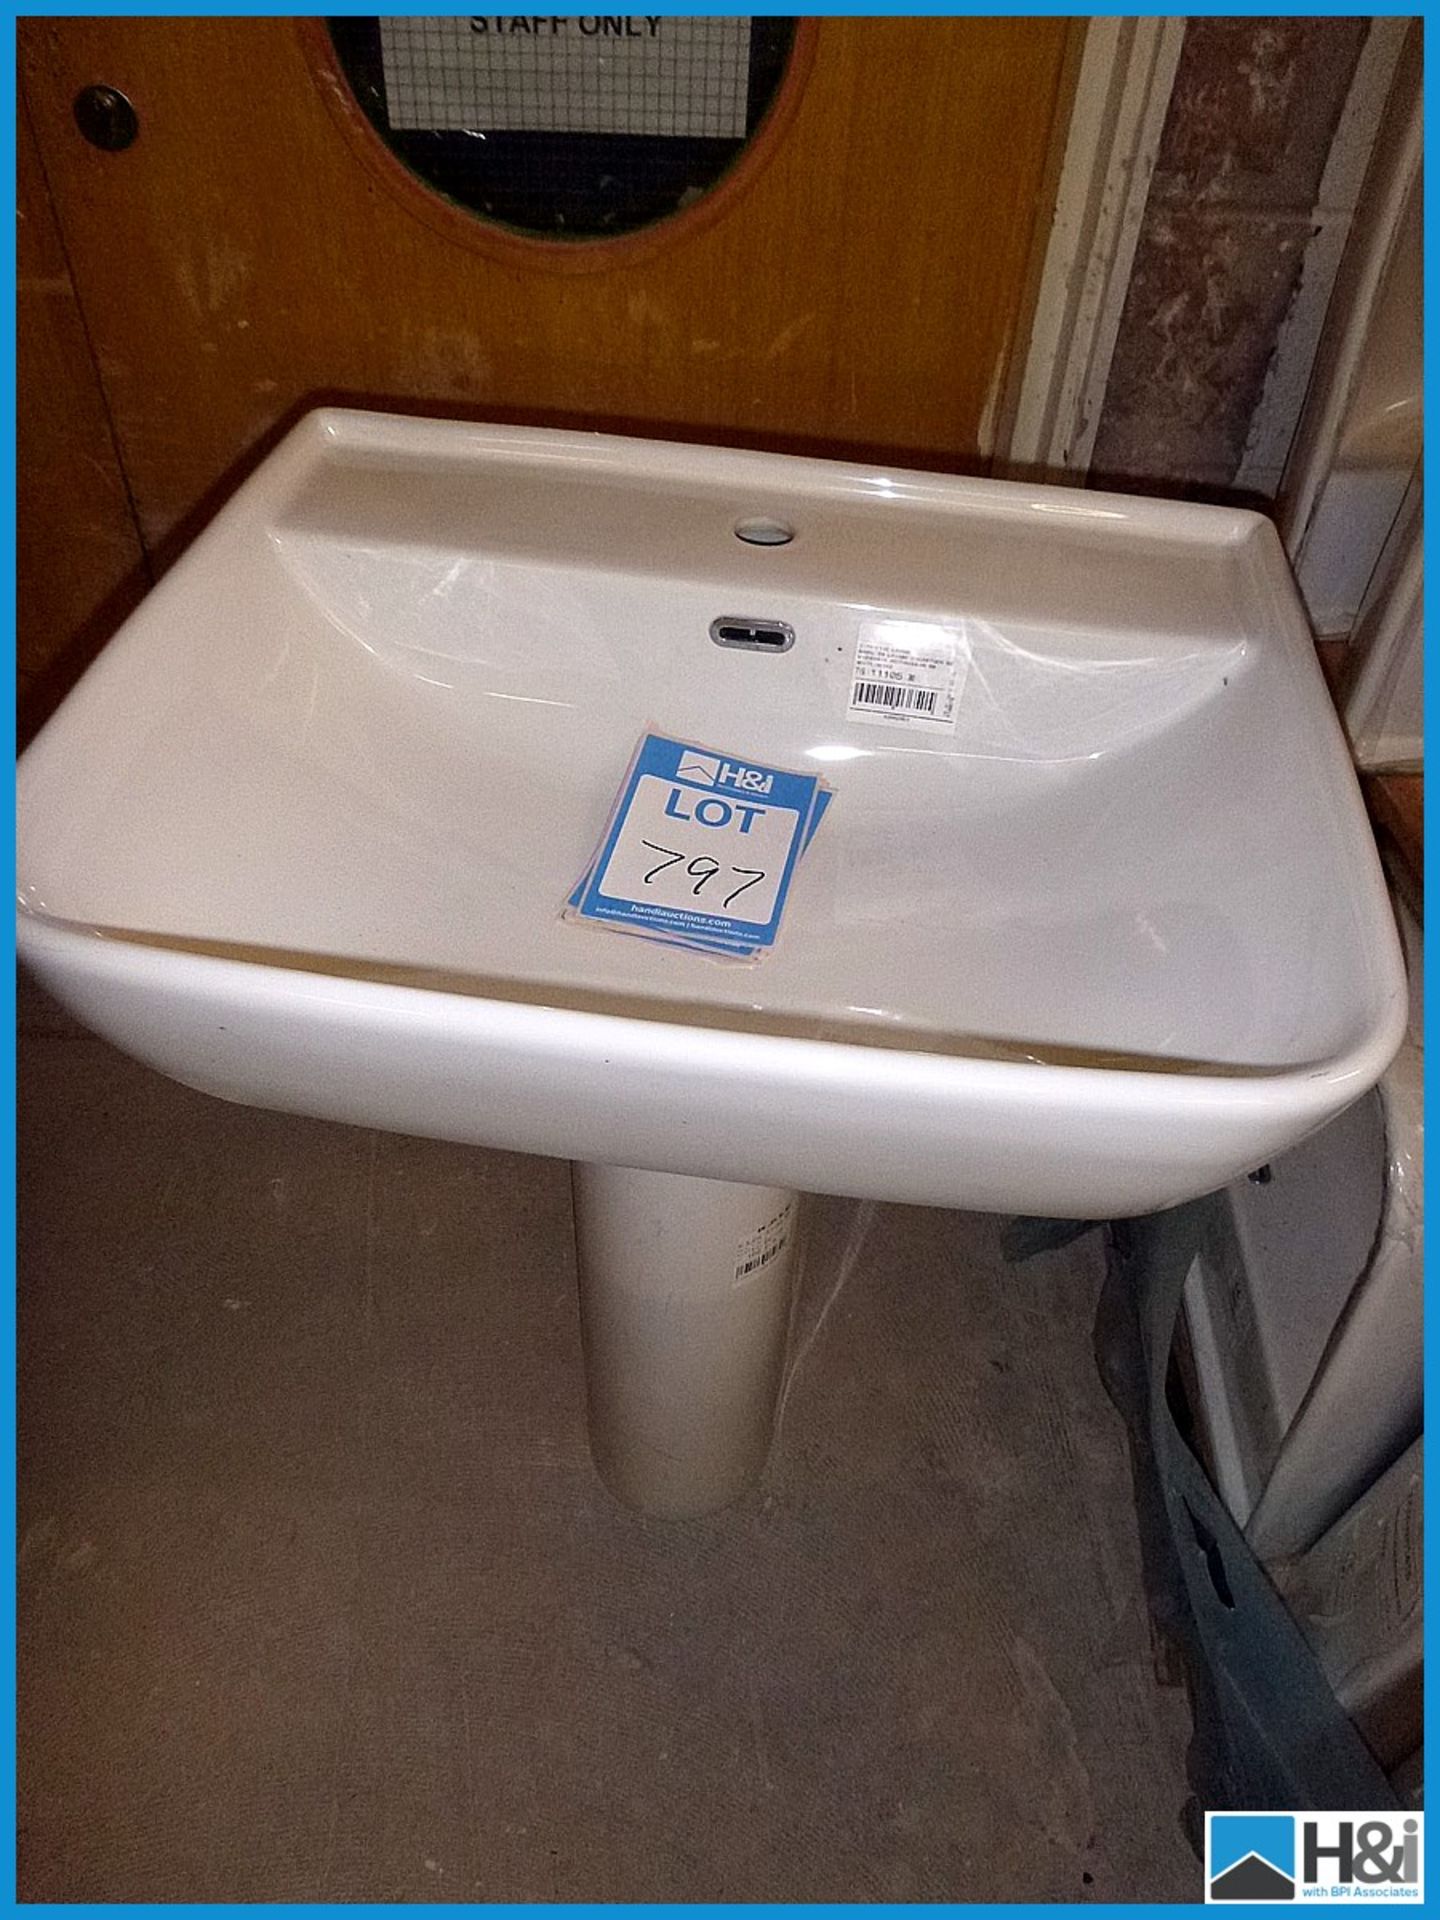 600mm x 500mm Vitra Basin & Pedestal RRP £98 Appraisal: Viewing Essential Serial No: NA Location: